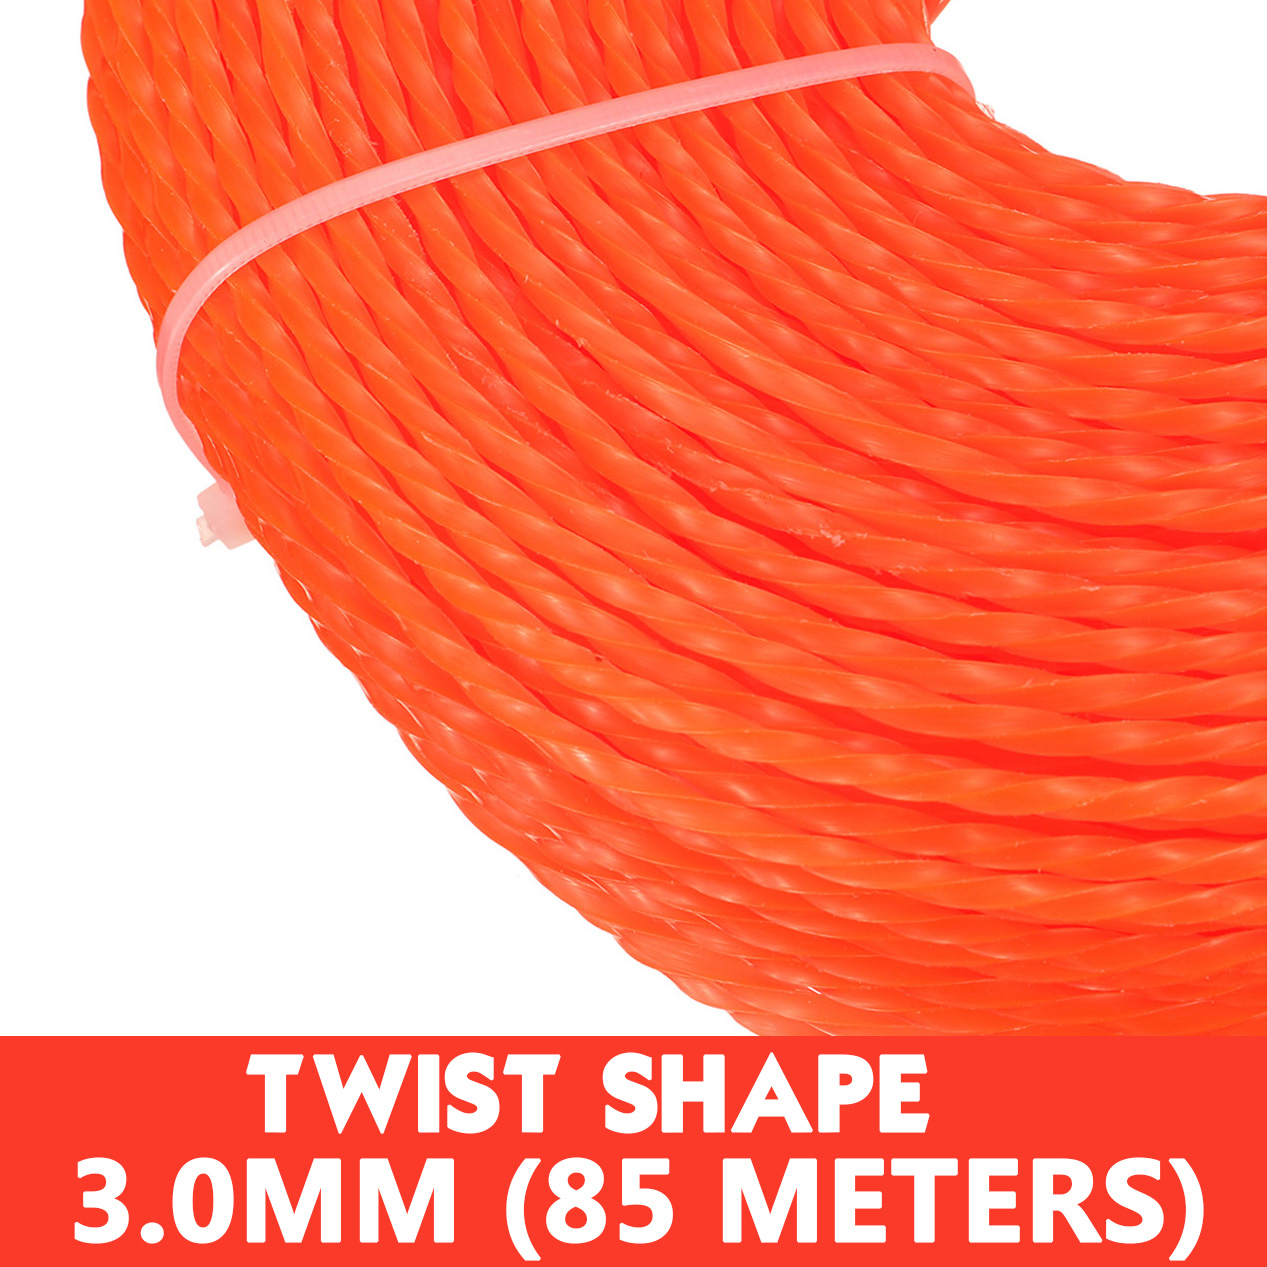 242730-mm-Commercial-Spiral-Twist-Trimmer-Line-Whipper-Snipper-Cord-1790010-2